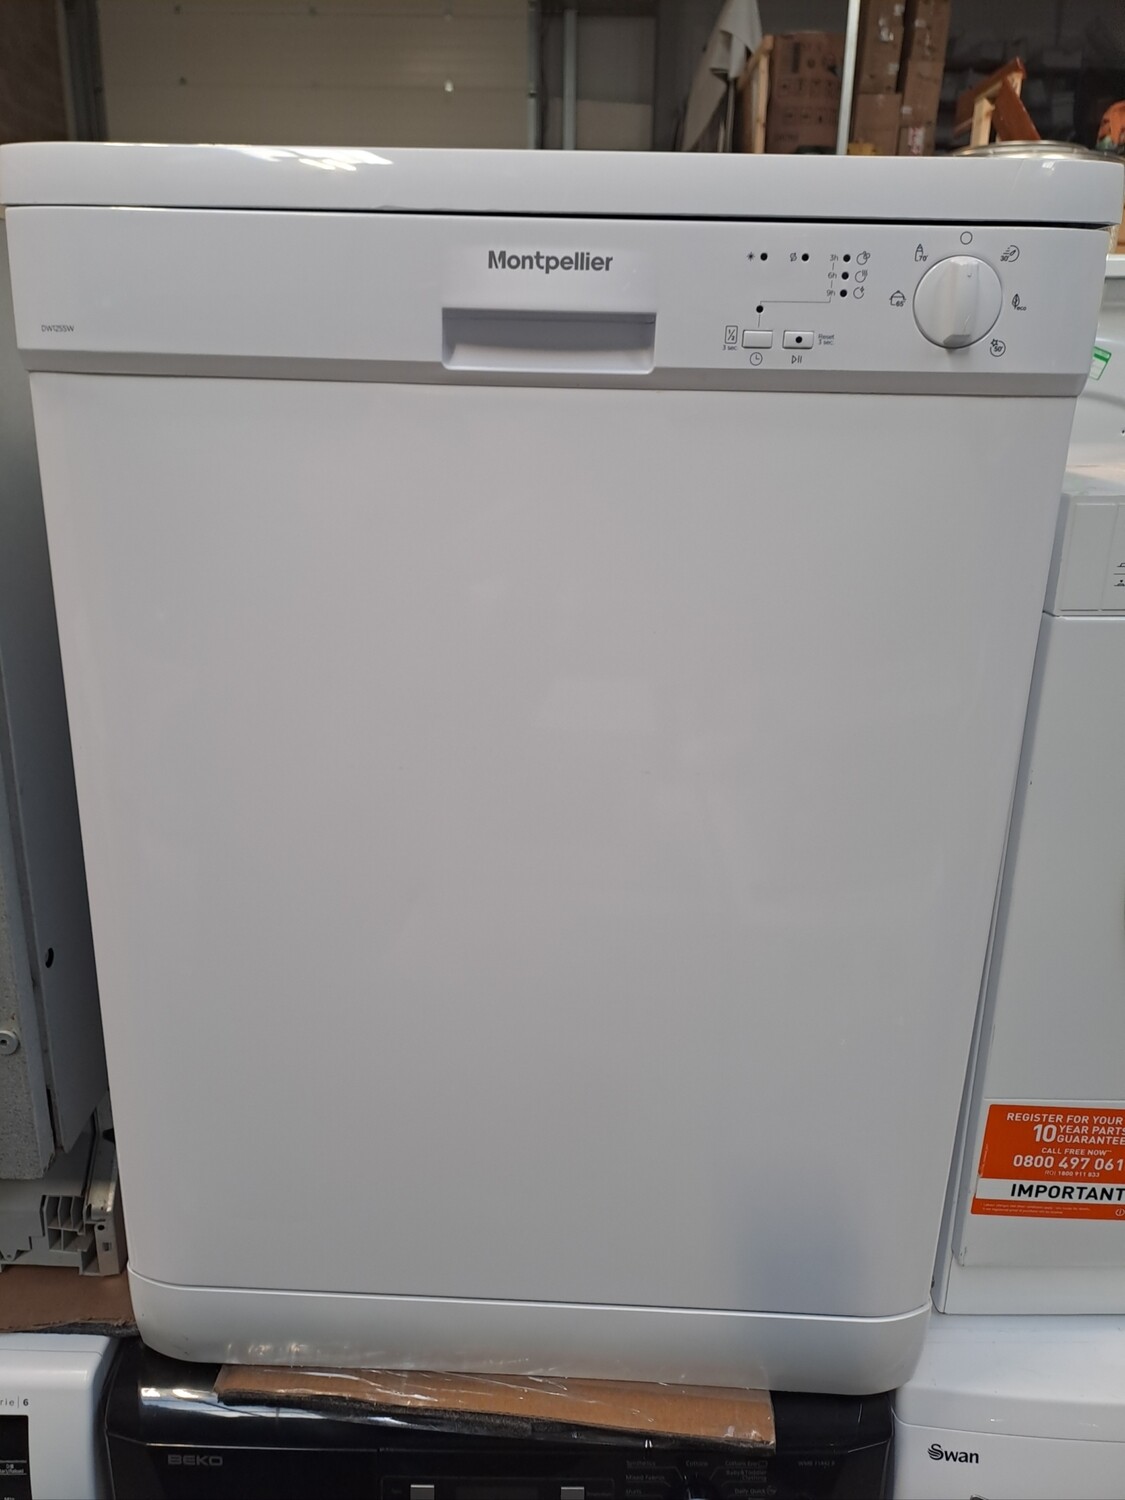 Montpellier DW1255W 60cm Freestanding Full Size Dishwasher White - Refurbished + 6 Months Guarantee . This item is located at our Whitby Road Shop